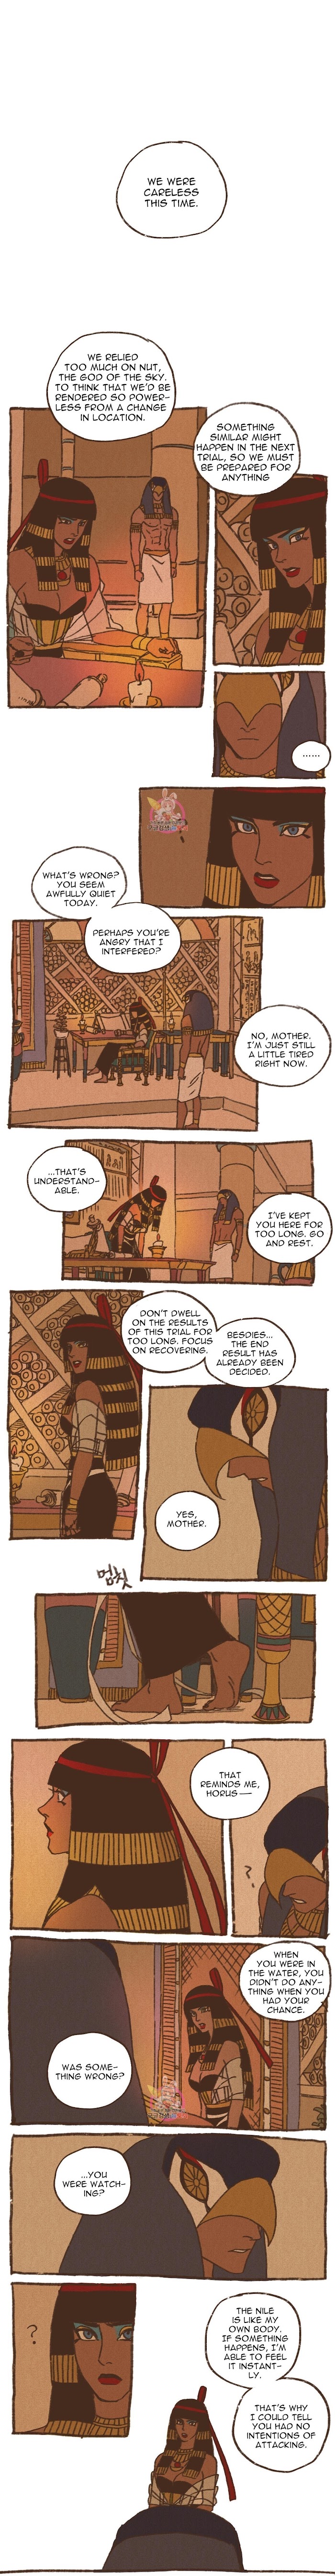 Ennead - Page 2